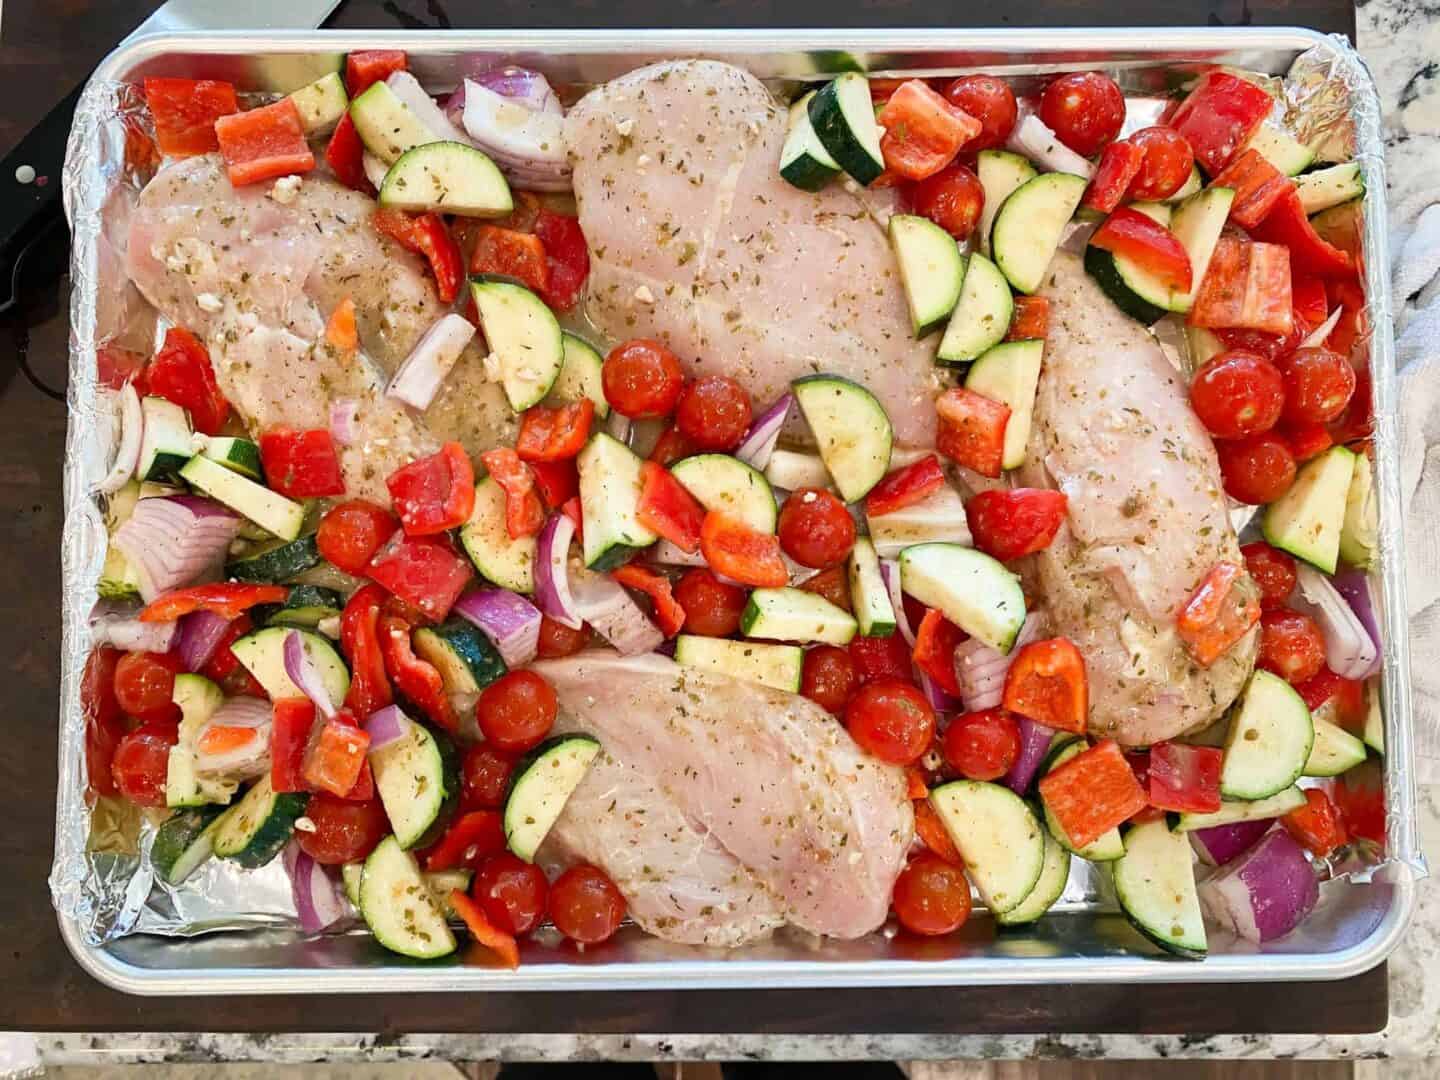 bake-chicken-breast-and-vegetables-at-375-for-about-30-minutes